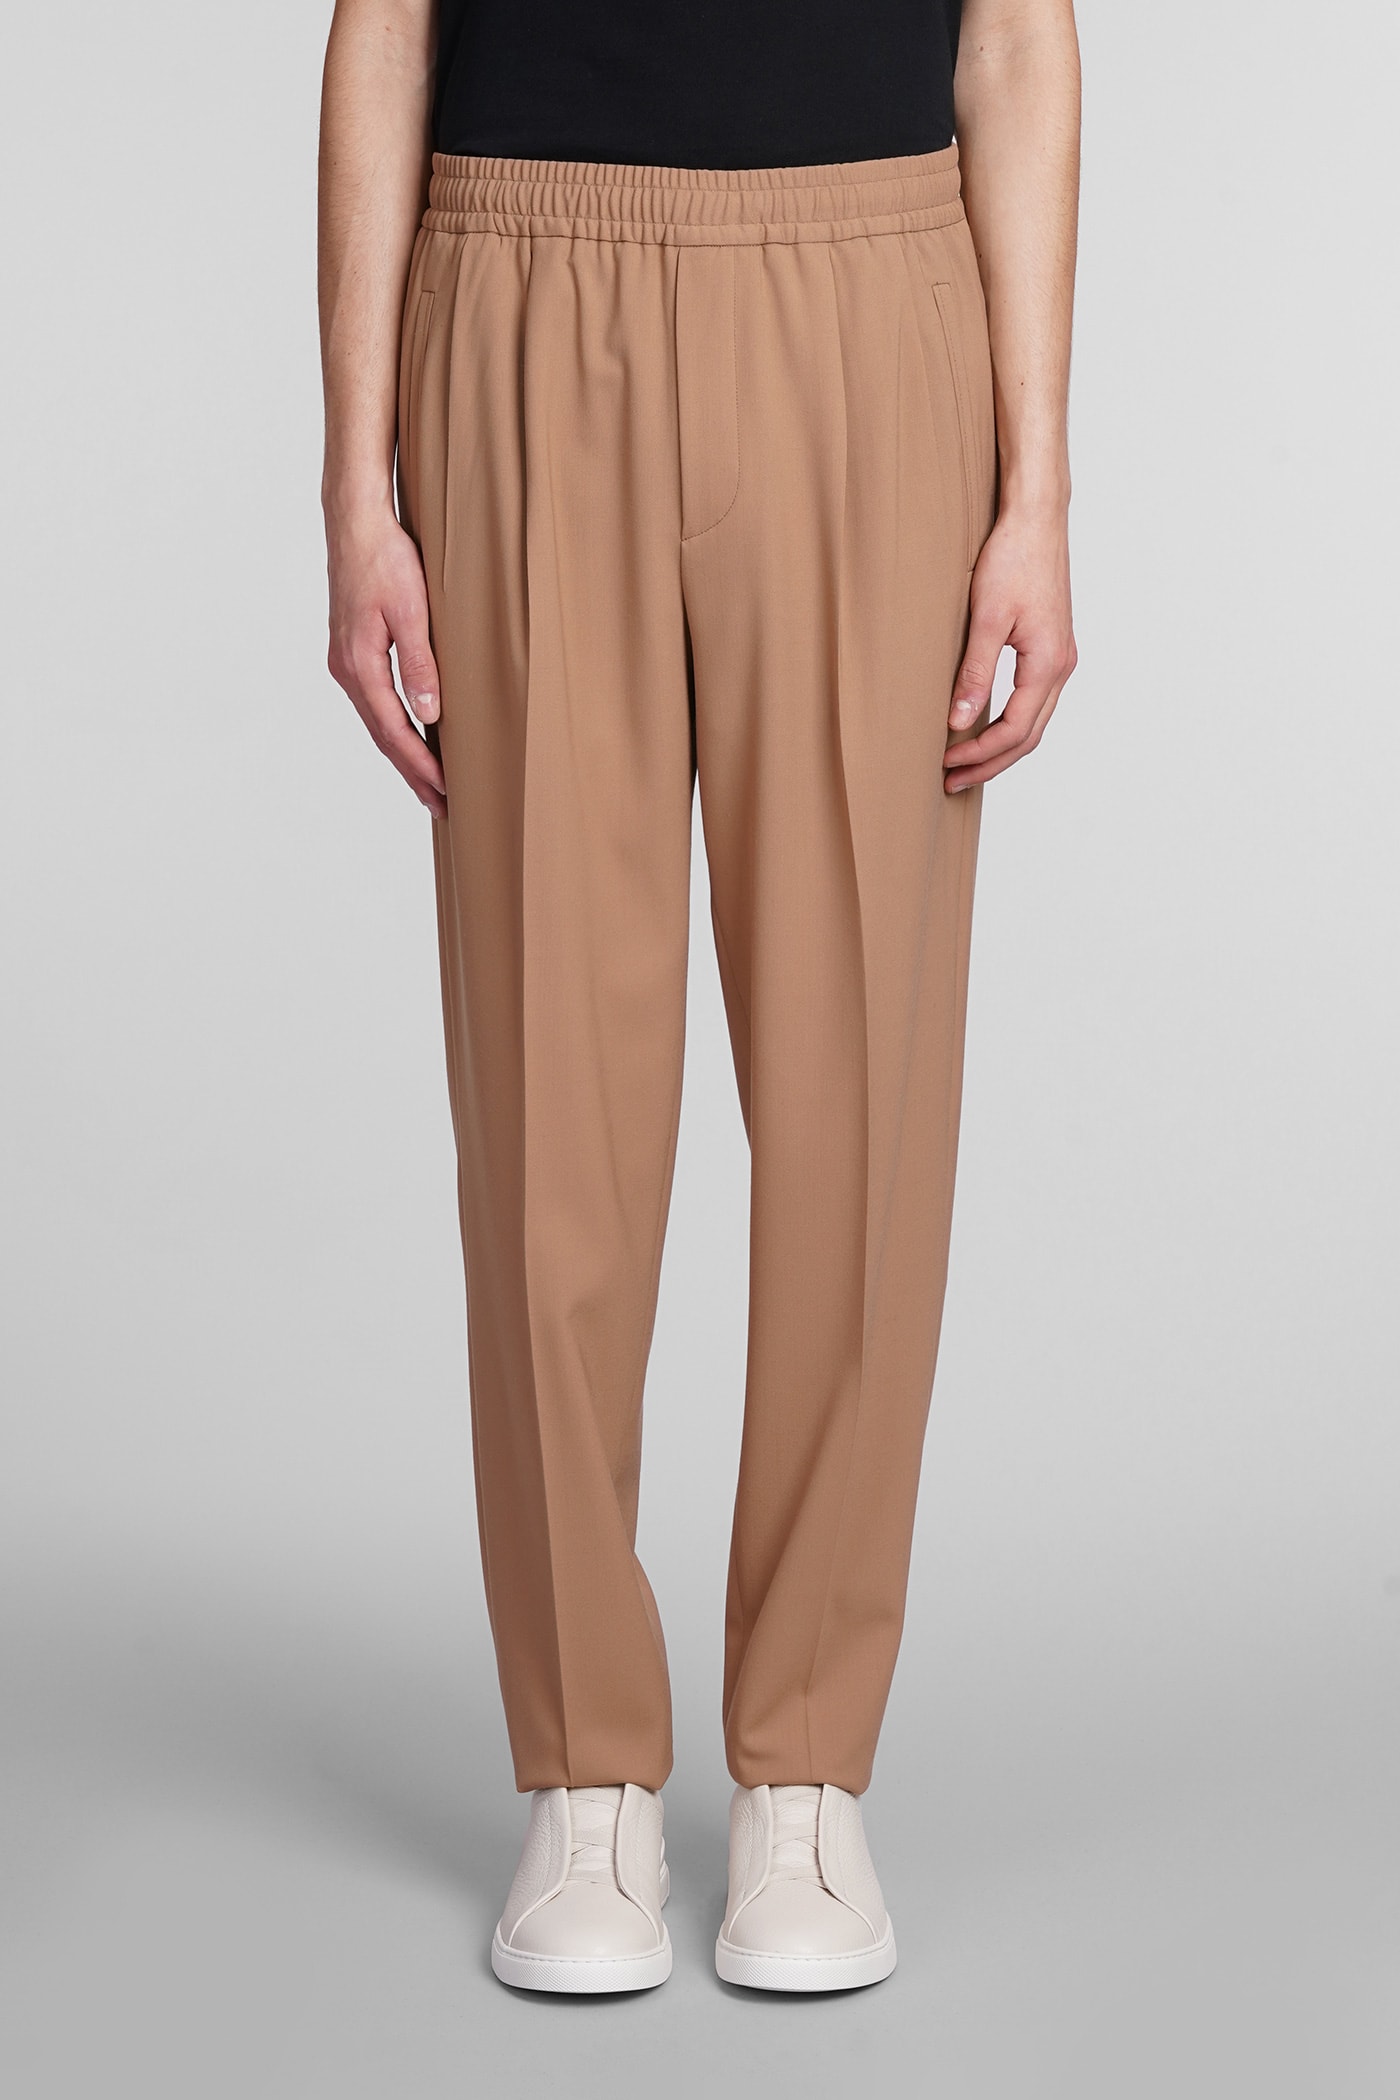 Zegna Pants In Camel Wool